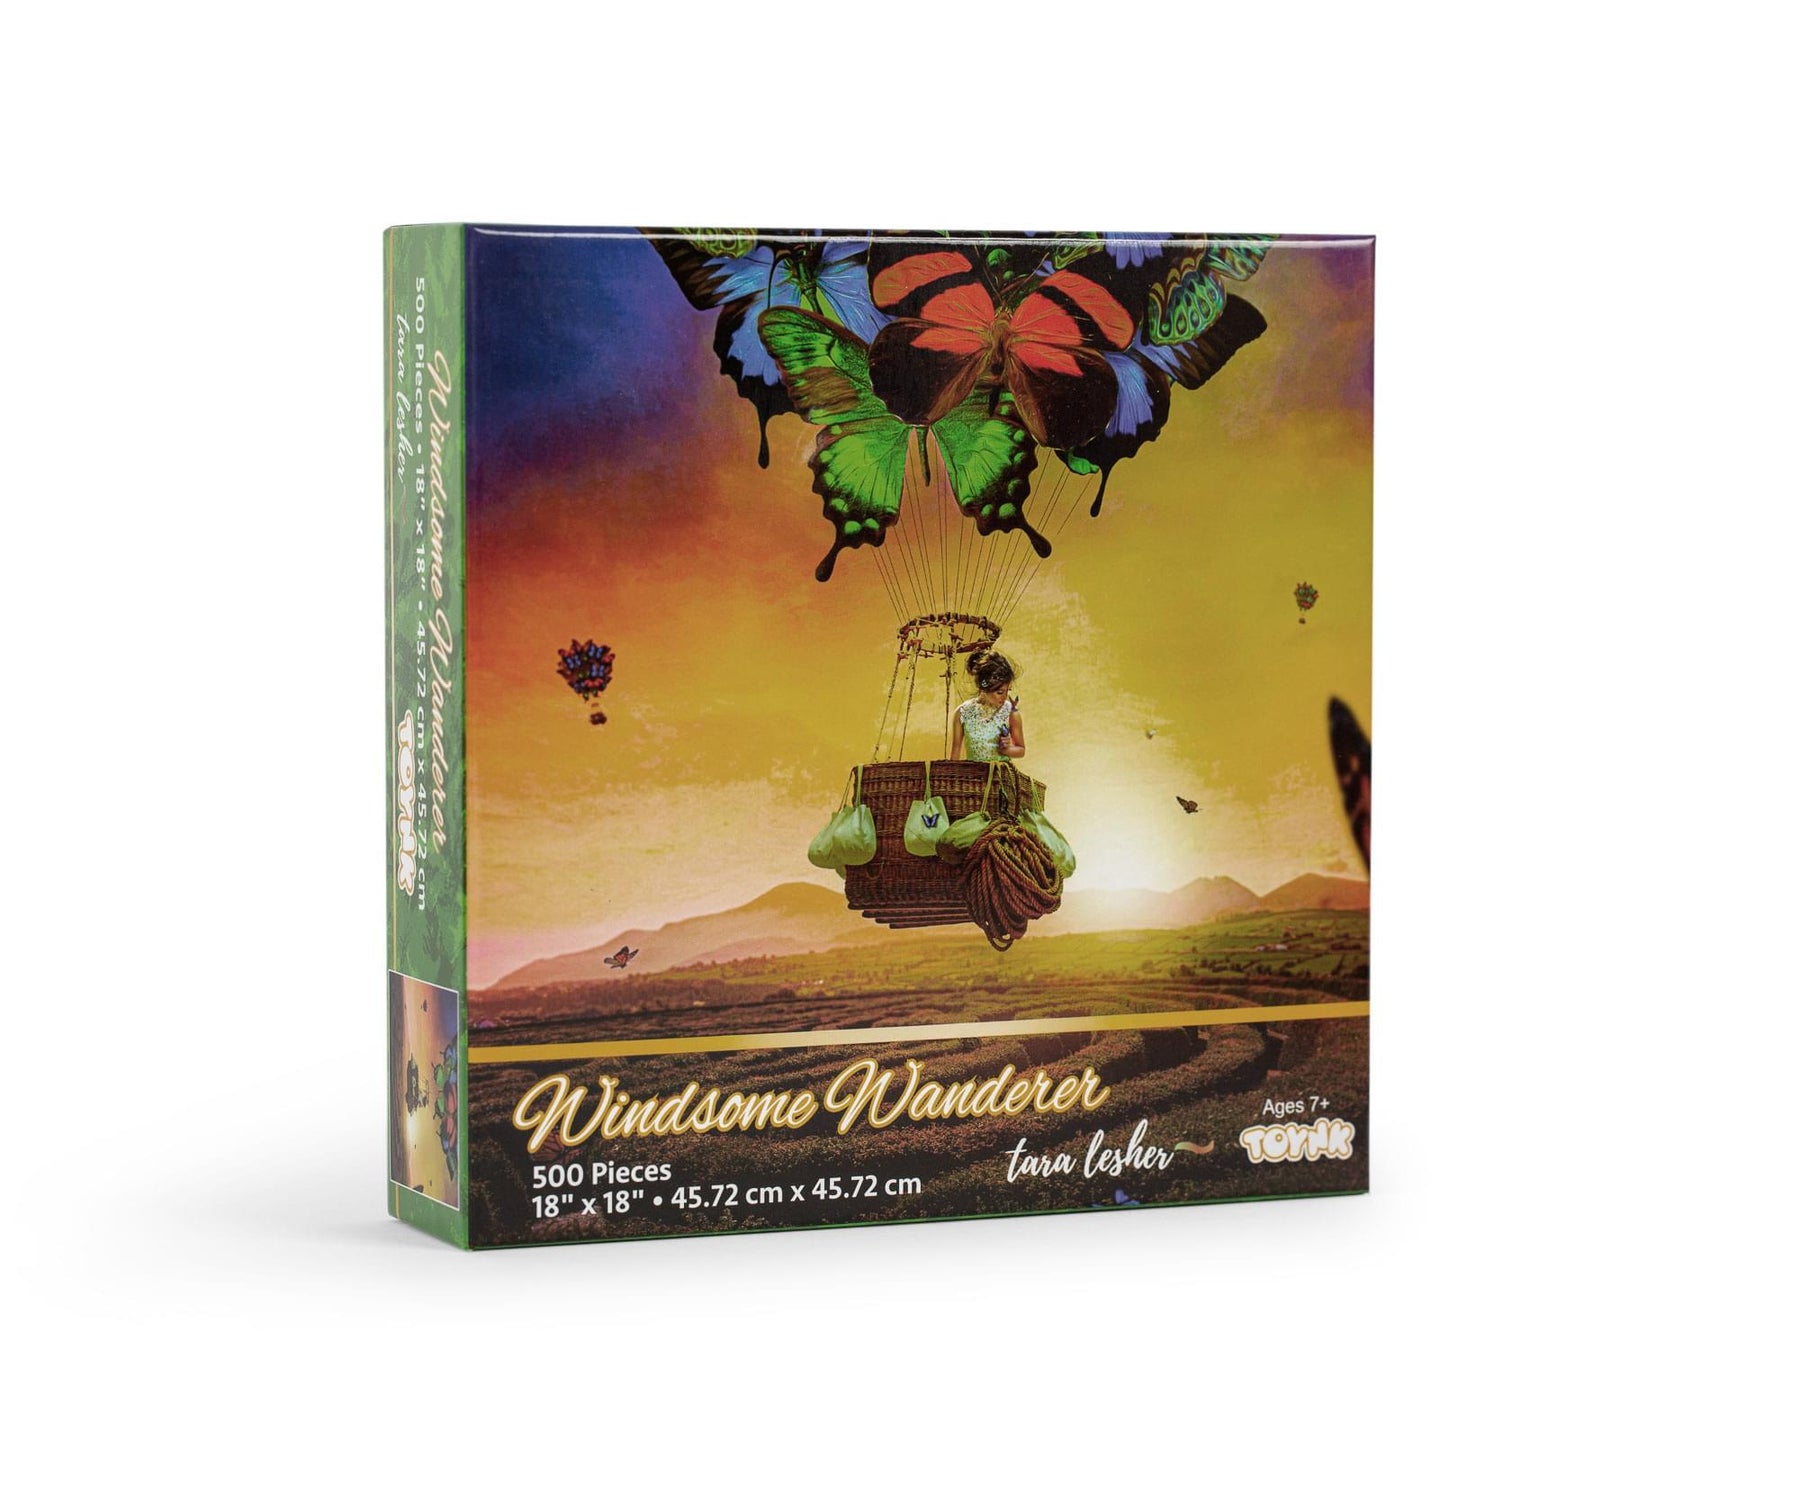 Windsome Wanderer Butterfly Puzzle By Tara Lesher | 500 Piece Jigsaw Puzzle